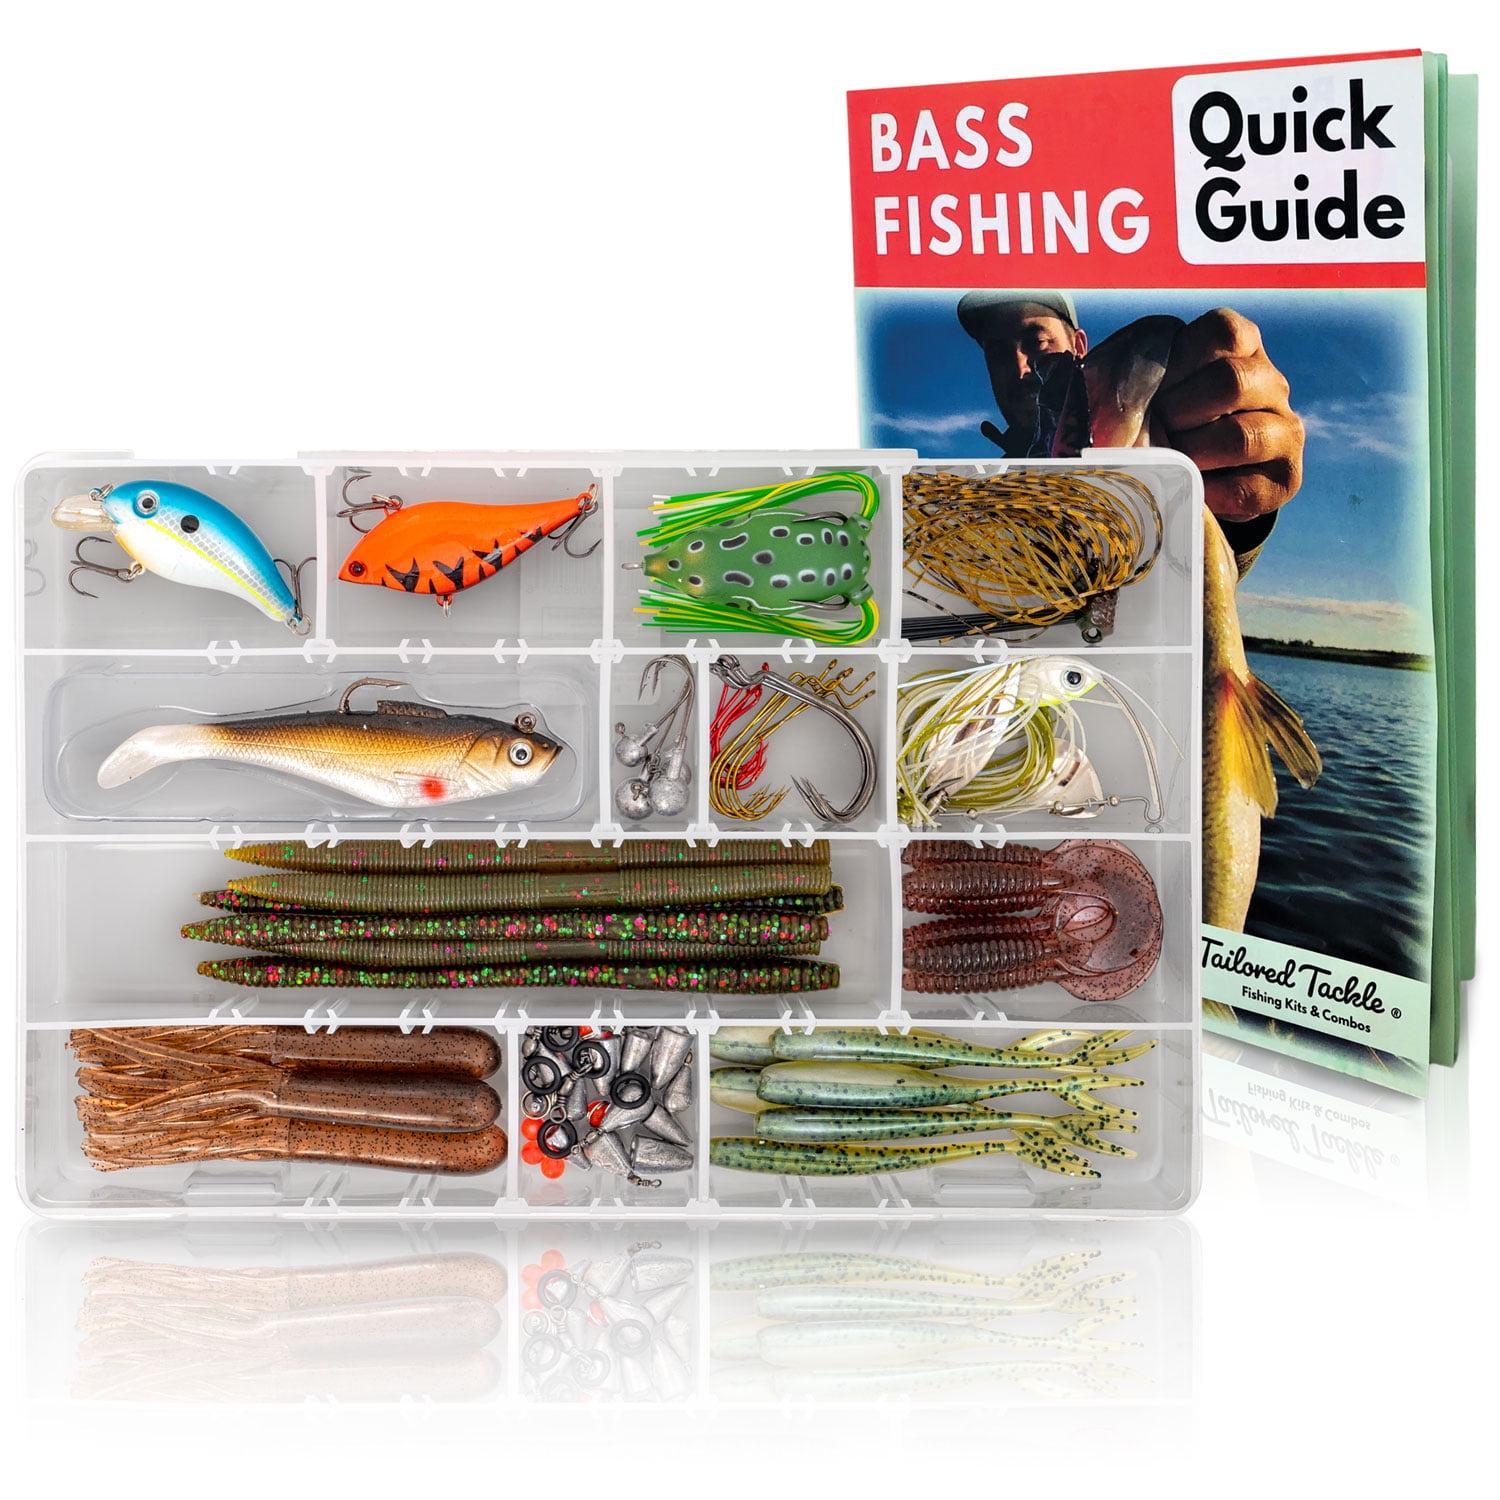 Tailored Tackle Walleye Fishing Kit 117 Pc Tackle Box with Tackle Included  | Crankbait Swimbait Grub Walleye Fishing Lures | Jigs Hooks & Crawler Worm